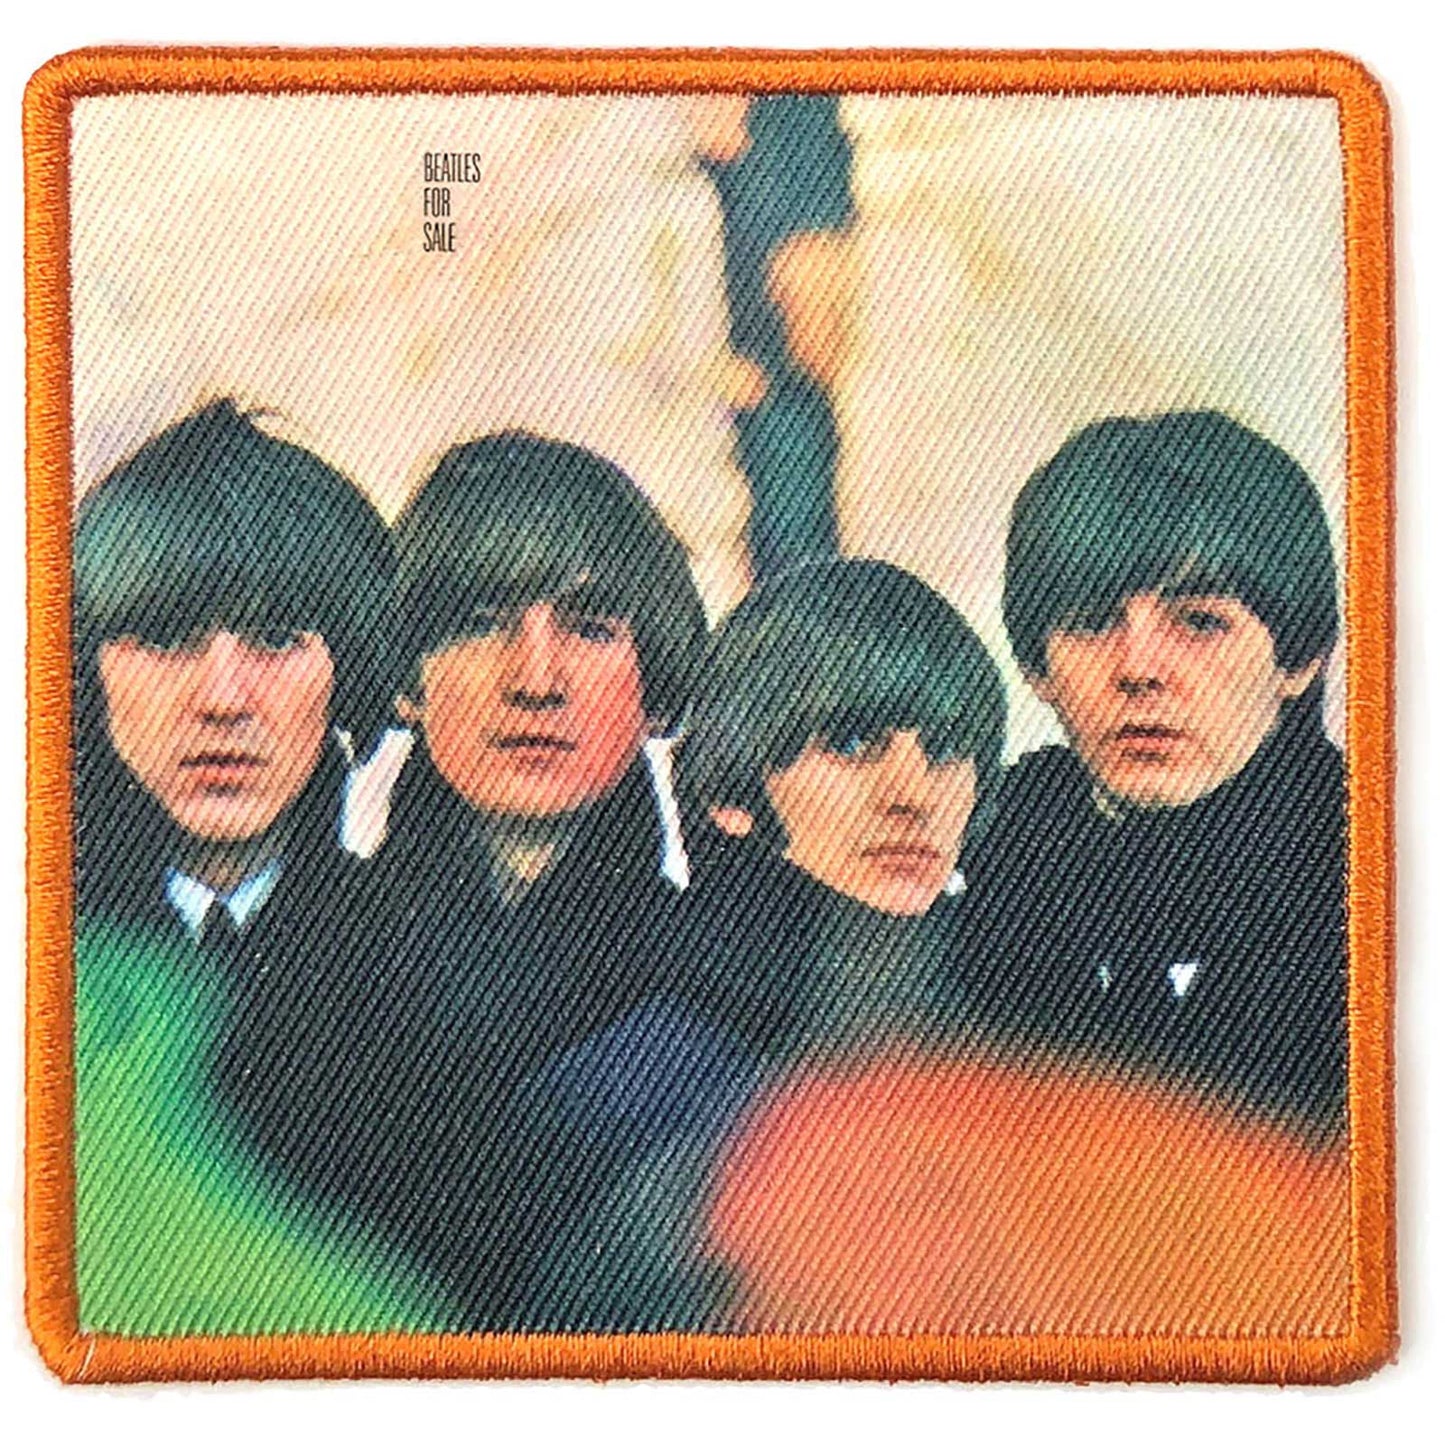 Beatles For Sale Patch